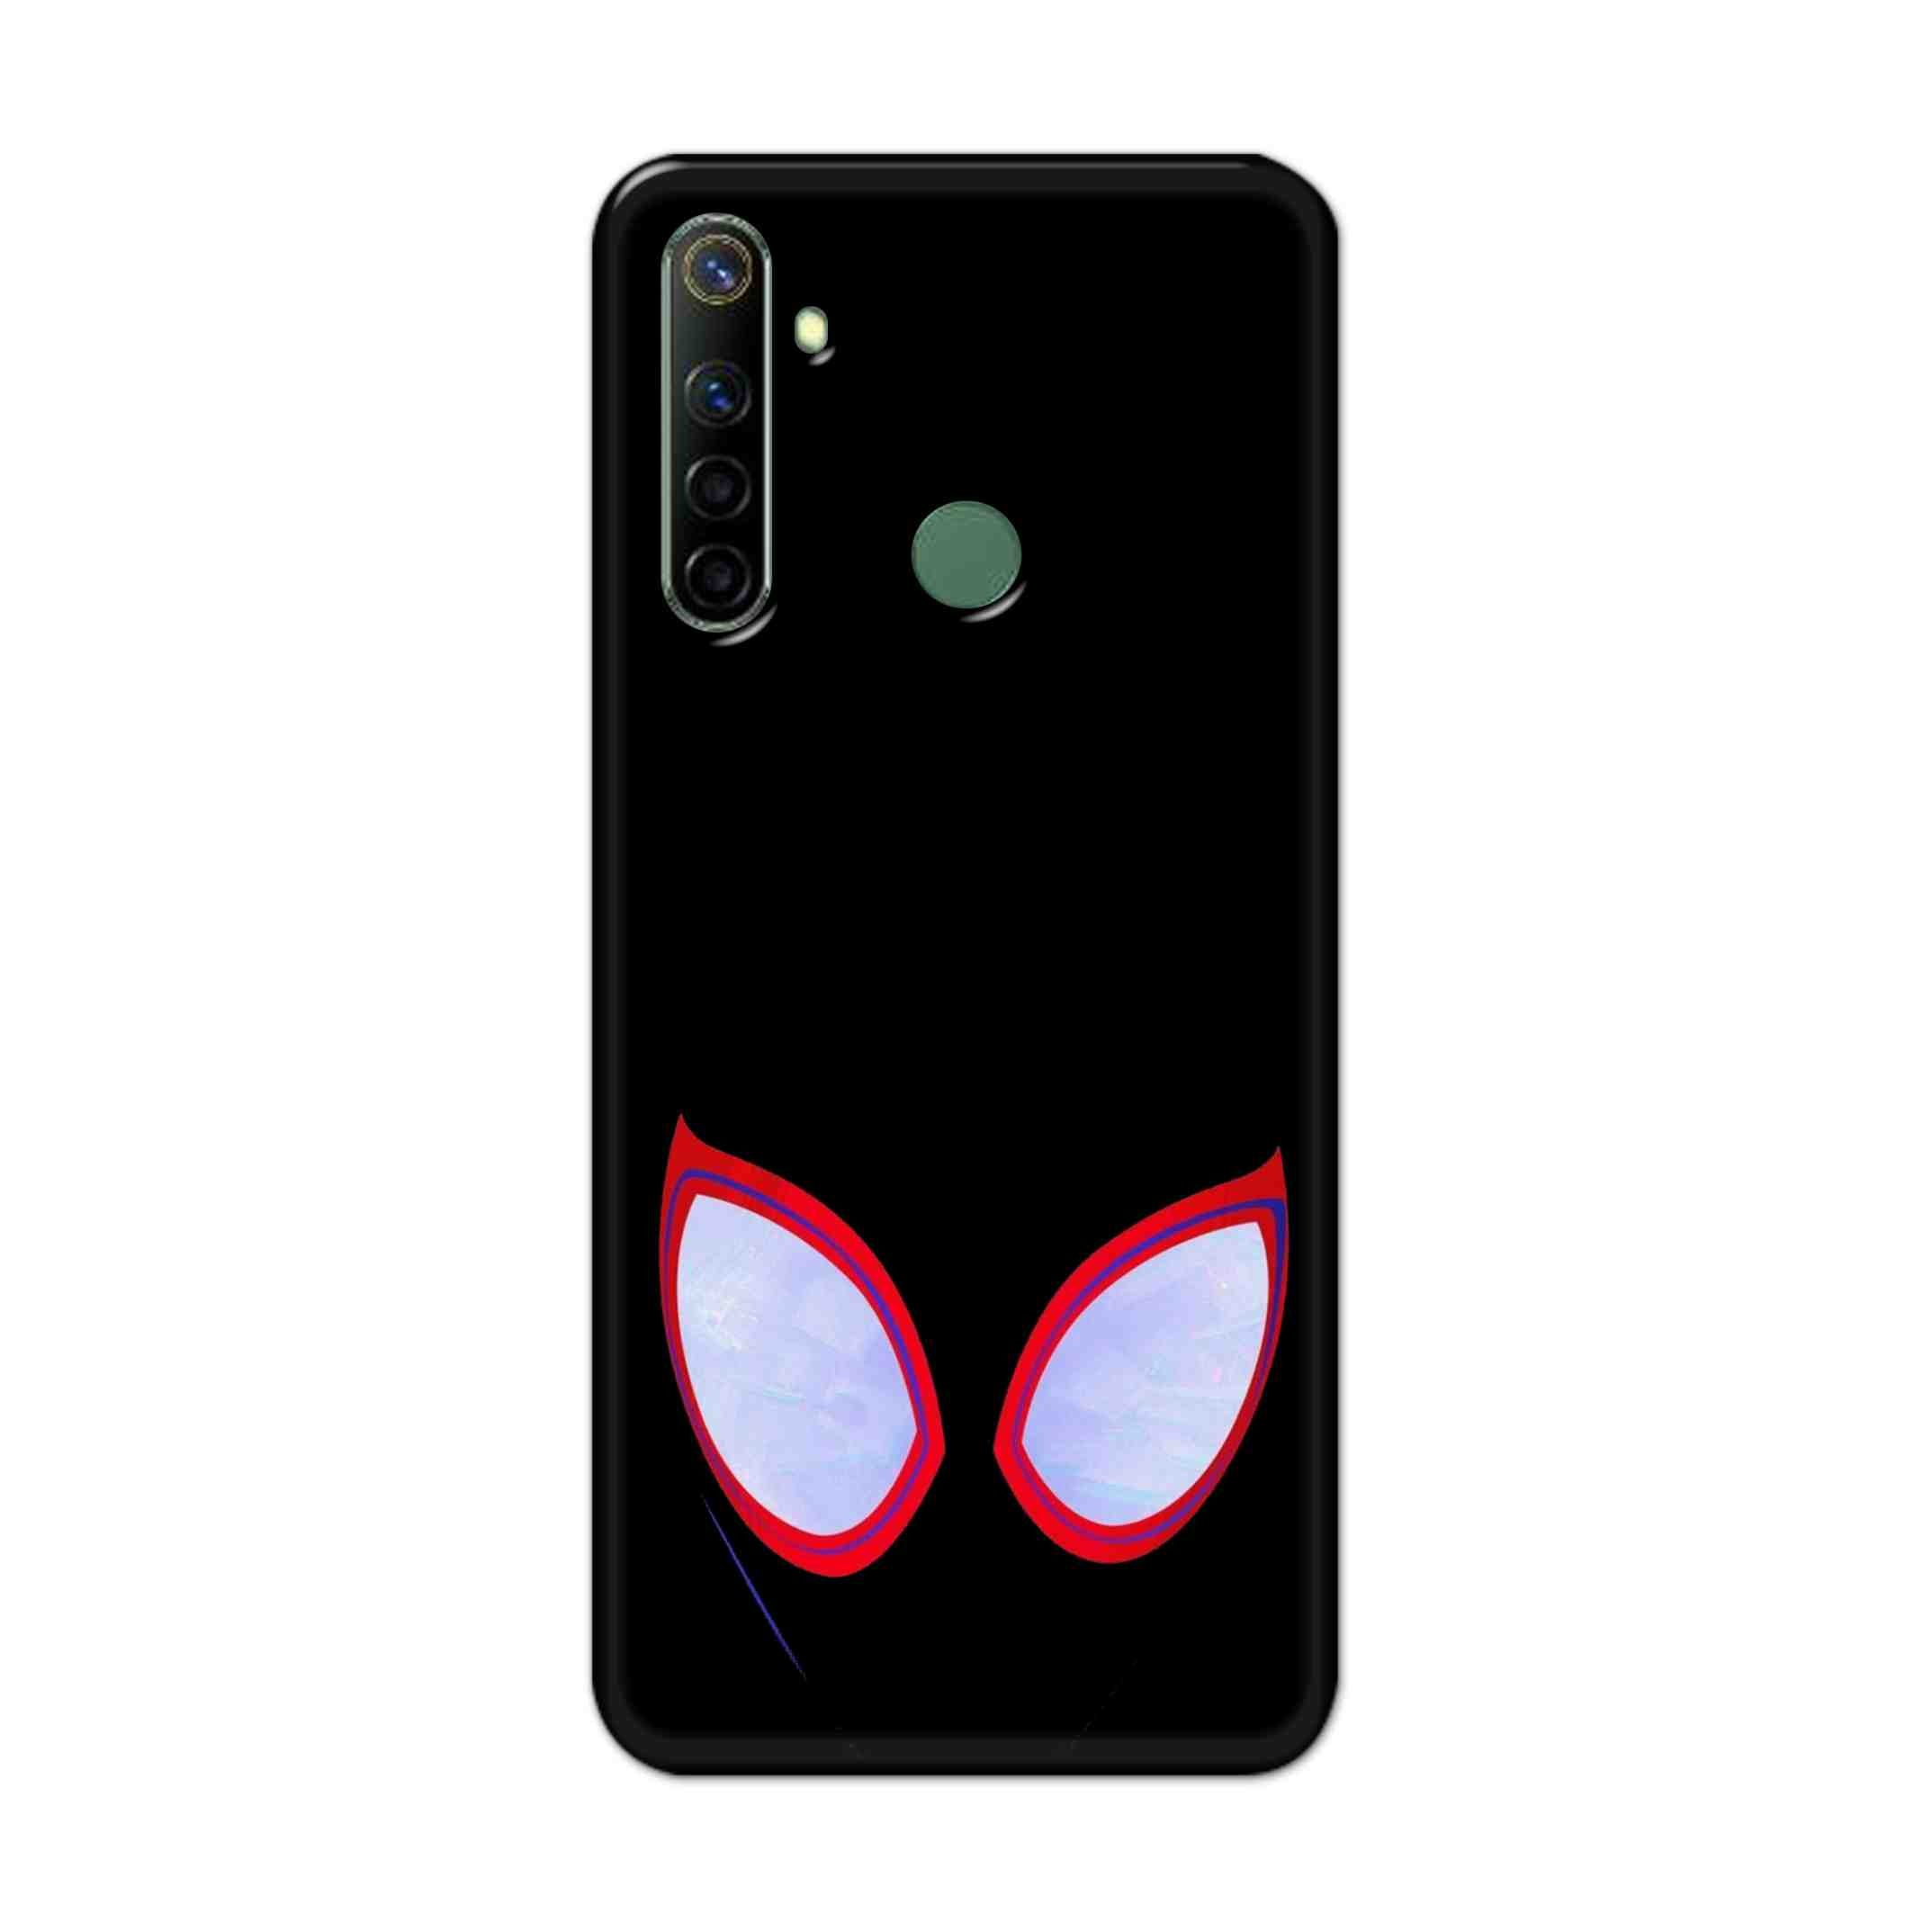 Buy Spiderman Eyes Hard Back Mobile Phone Case Cover For Realme Narzo 10a Online